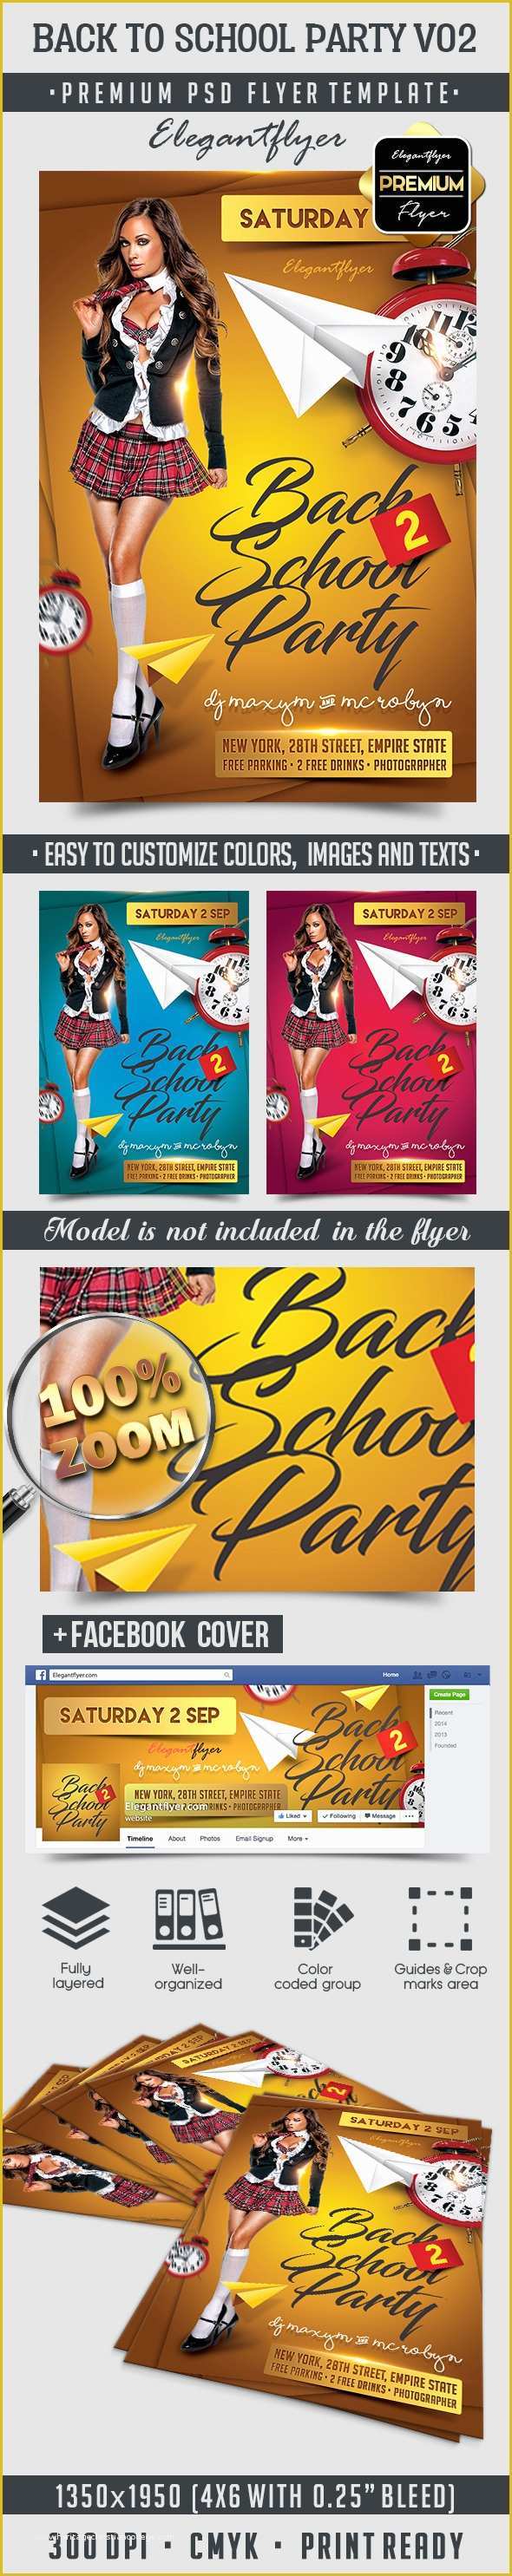 Back to School Bash Flyer Template Free Of Back to School Party V02 – Flyer Psd Template – by